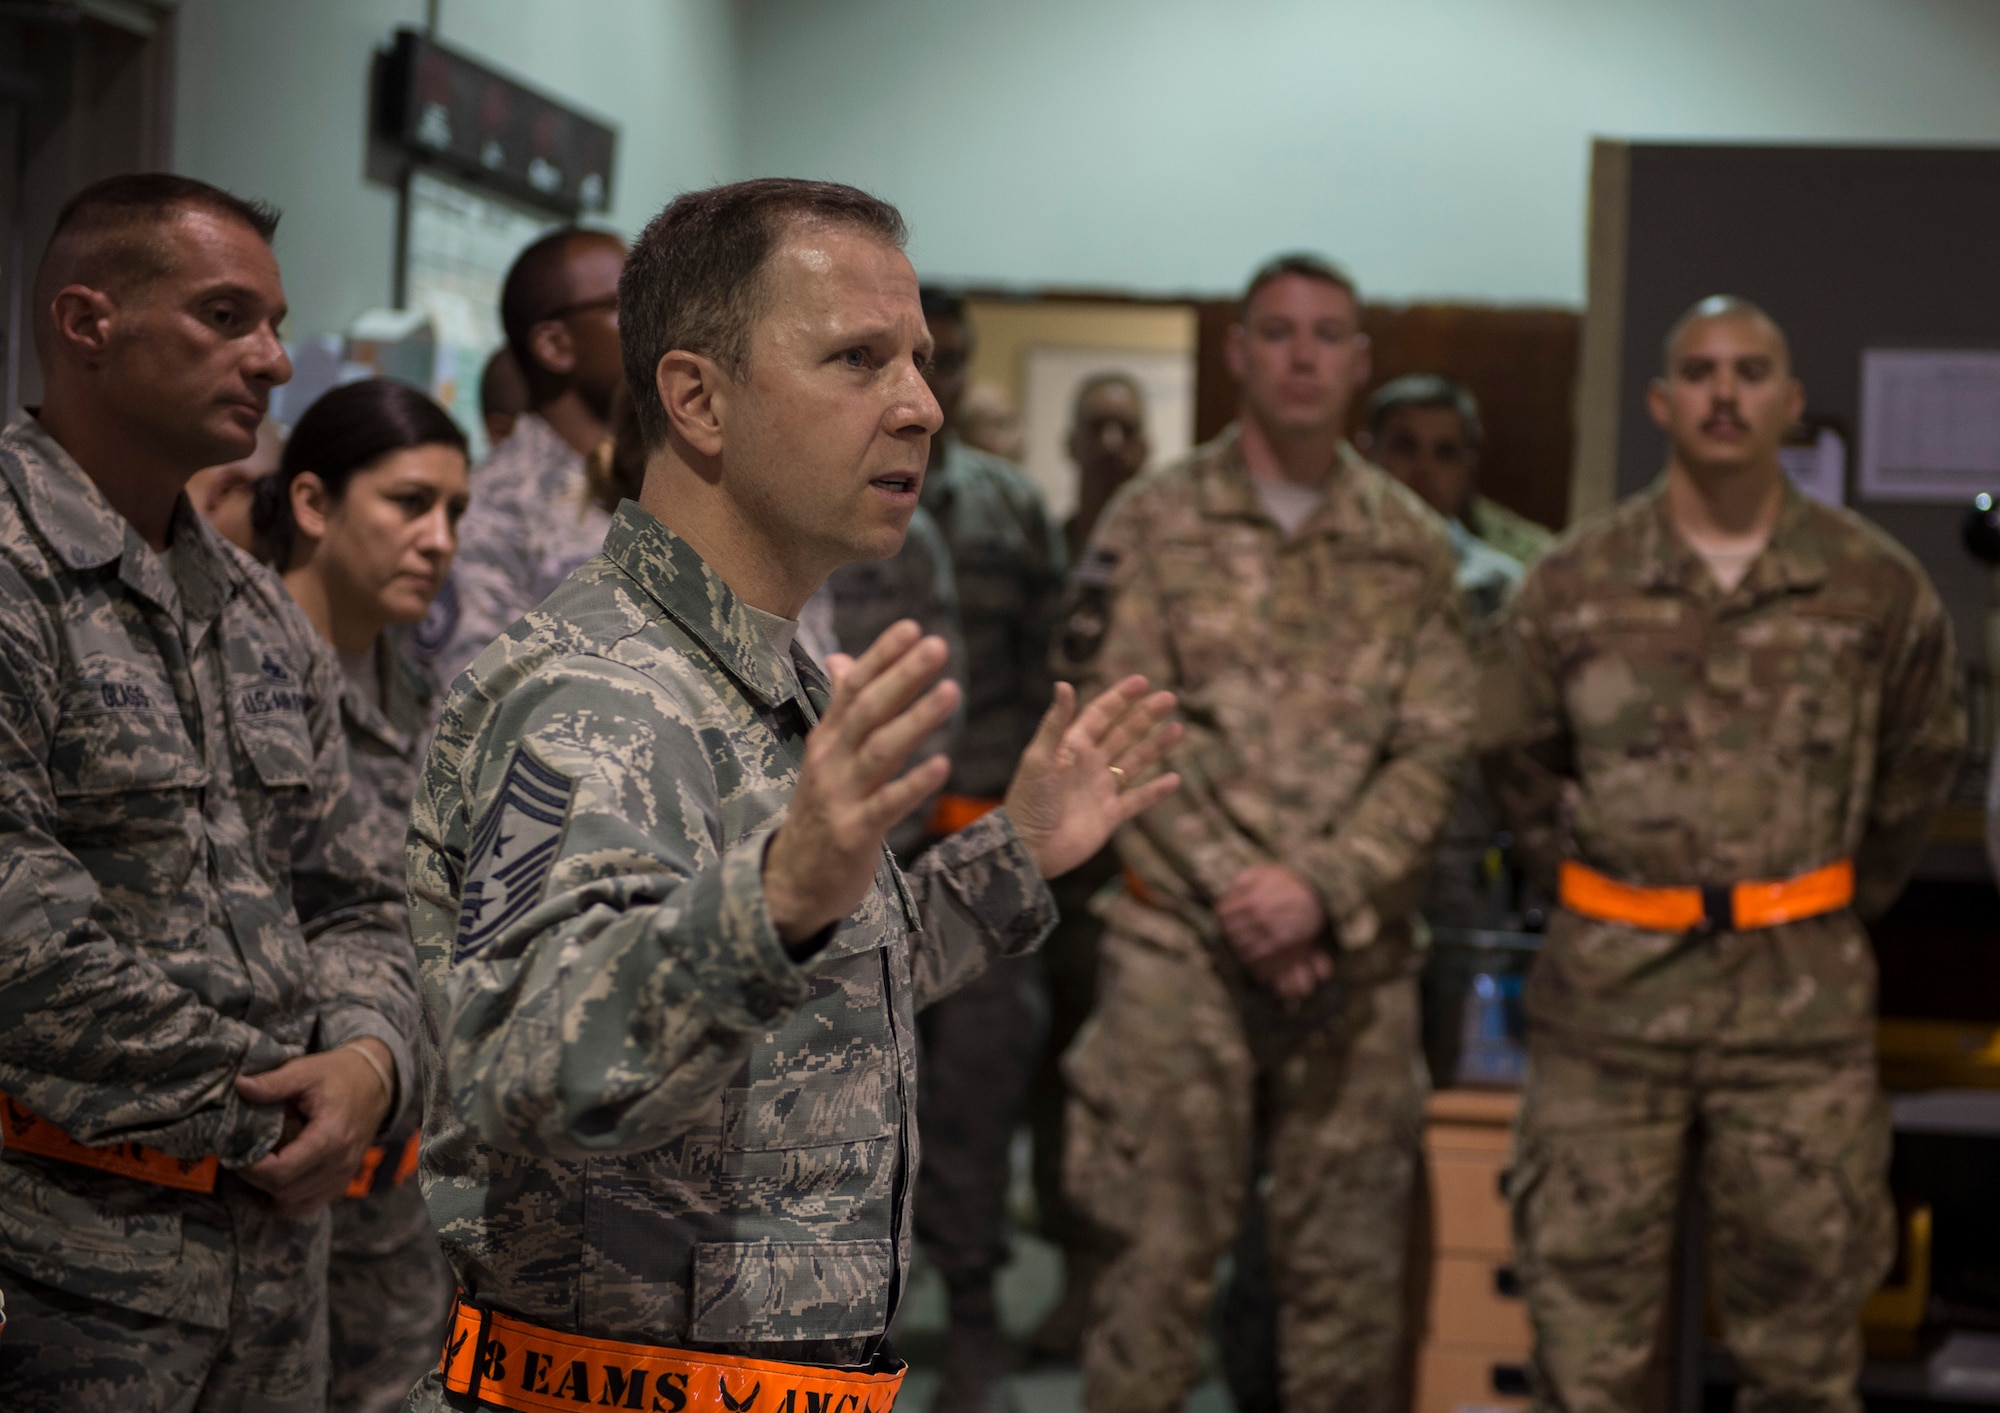 U.S. Air Force Chief Master Sgt. Mark Redden, Command Chief with the 521st Air Mobility Operations Wing at Ramstein Air Force Base, Germany, visits airmen with the 8th Expeditionary Air Mobility Squadron at Al Udeid Air Base, Qatar, May 6, 2017. Redden was accompanied by Chief Master Sgt. Shelina Frey, Command Chief Master Sergeant for Air Mobility Command and made several stops throughout the 8th Expeditionary Air Mobility Squadron sections, providing an opportunity for Airmen to speak about their duties and ask questions.  (U.S. Air Force photo by Tech. Sgt. Amy M. Lovgren)